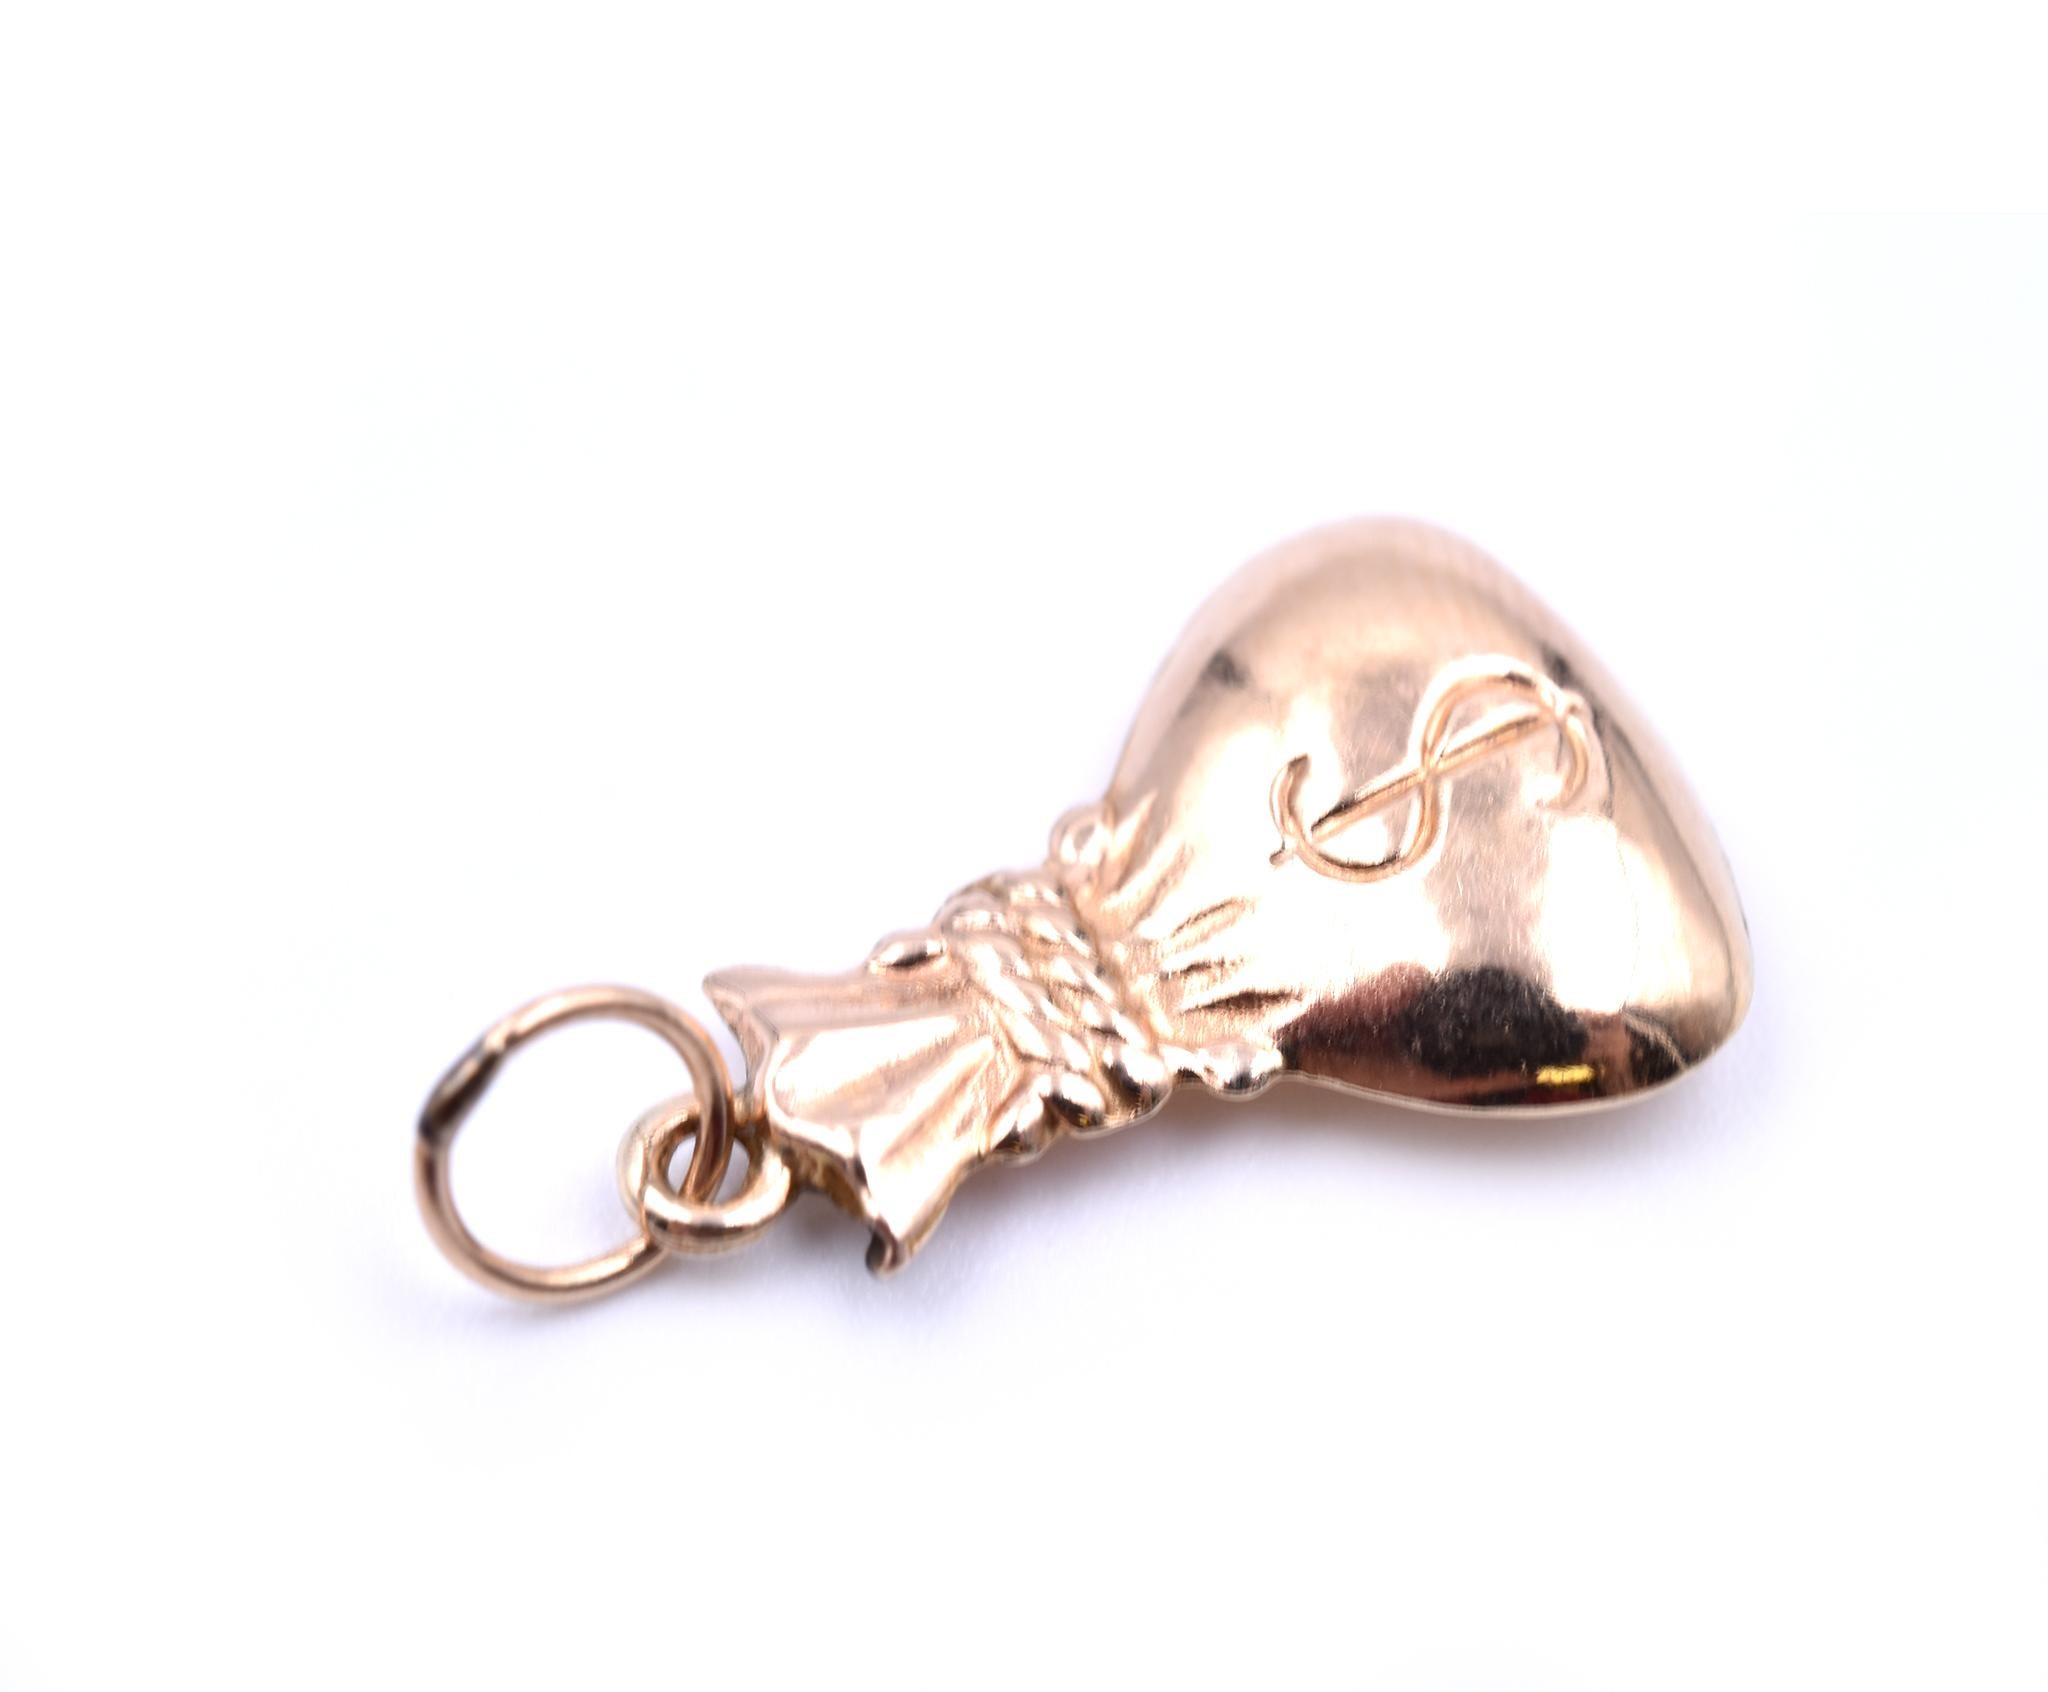 Designer: custom design
Material: 14k yellow gold
Dimensions: charm is 20mm long and 11.5mm wide
Weight: .50 grams
